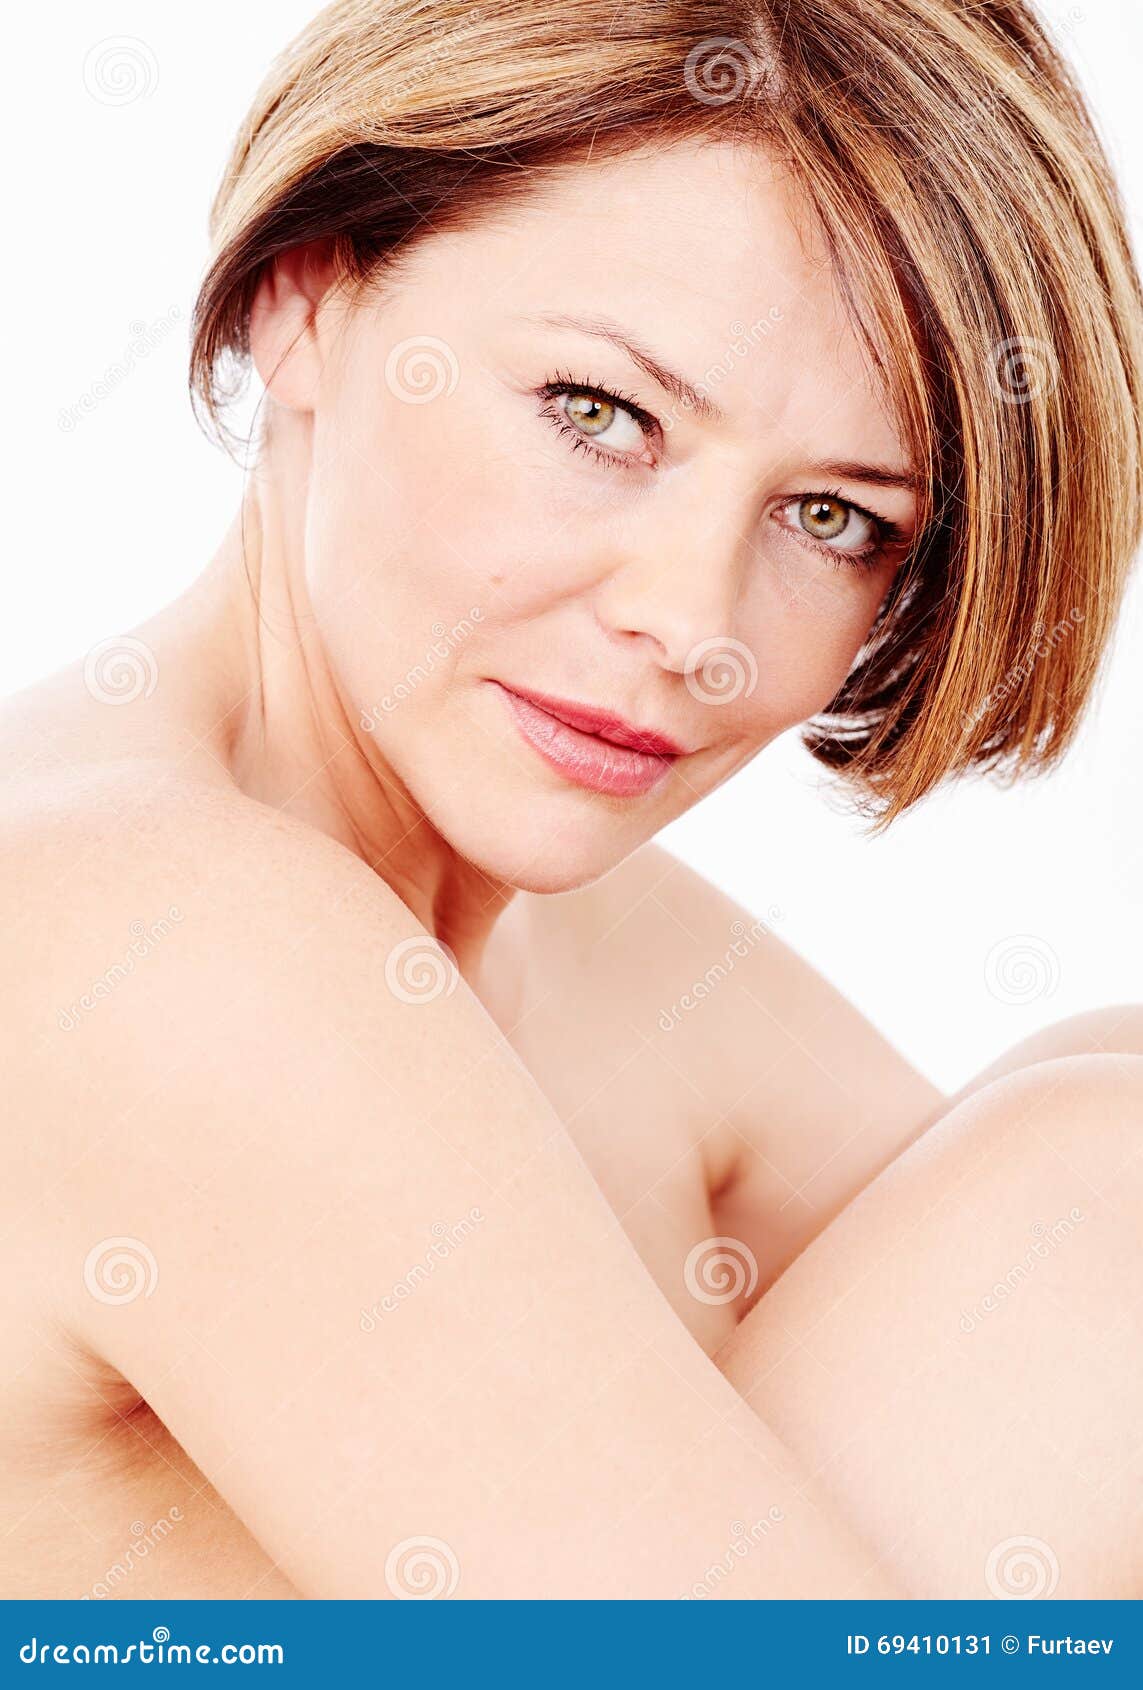 Mature Woman Portrait Close Up Beautiful Middle Aged Short Brown Hair Red Lips Fresh Makeup Looking Stock Photos picture